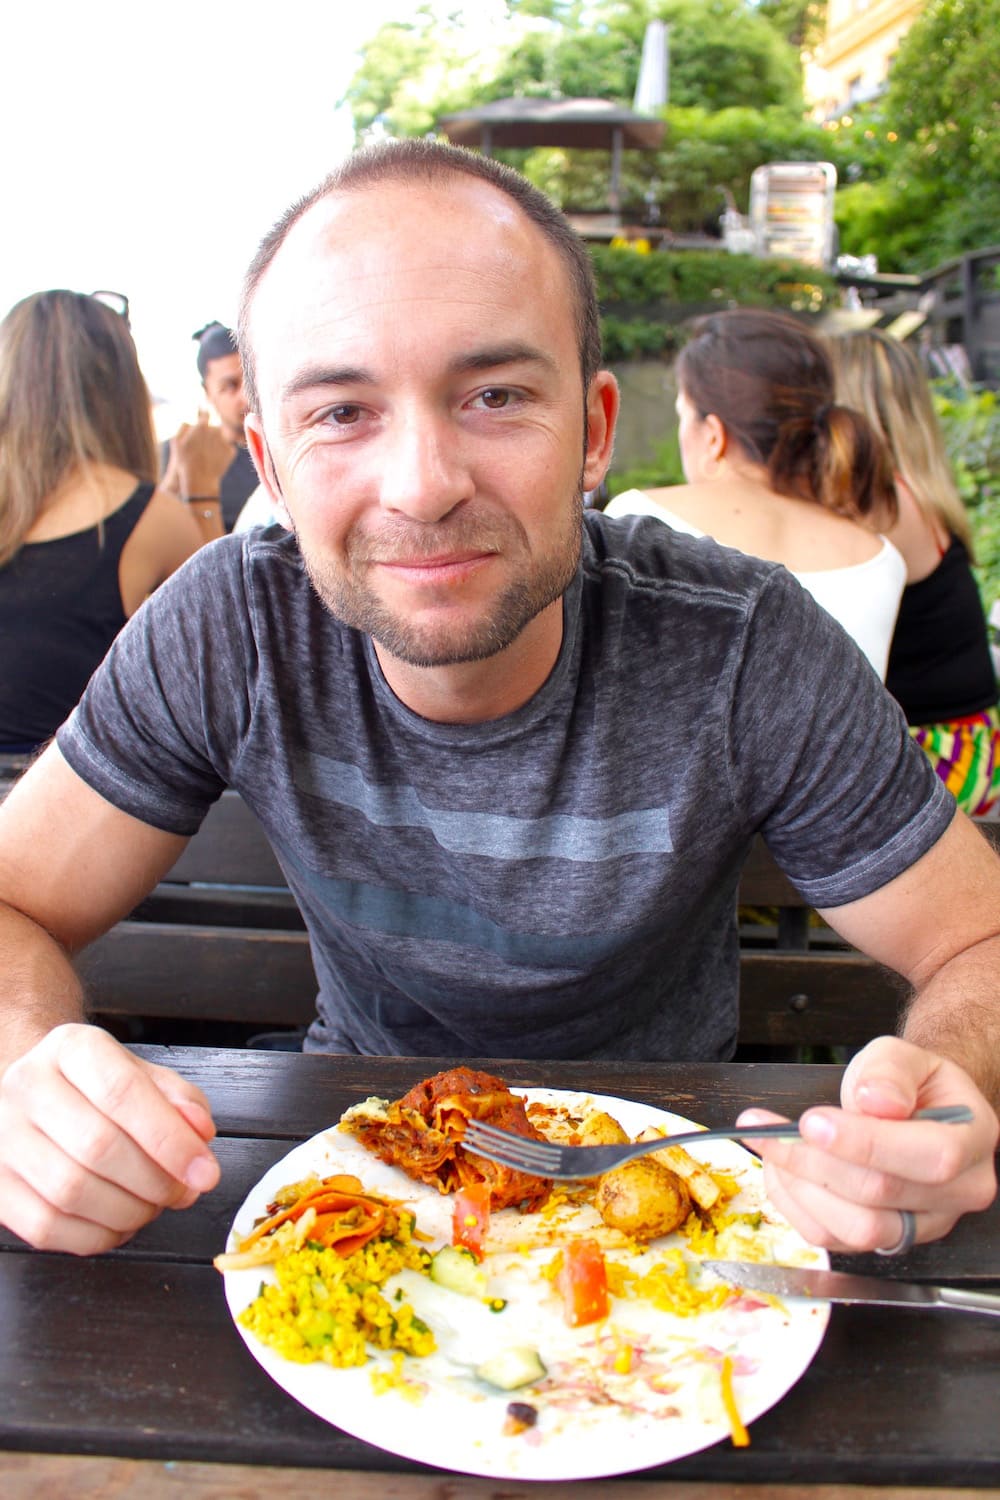 a man eating with a plateful of food